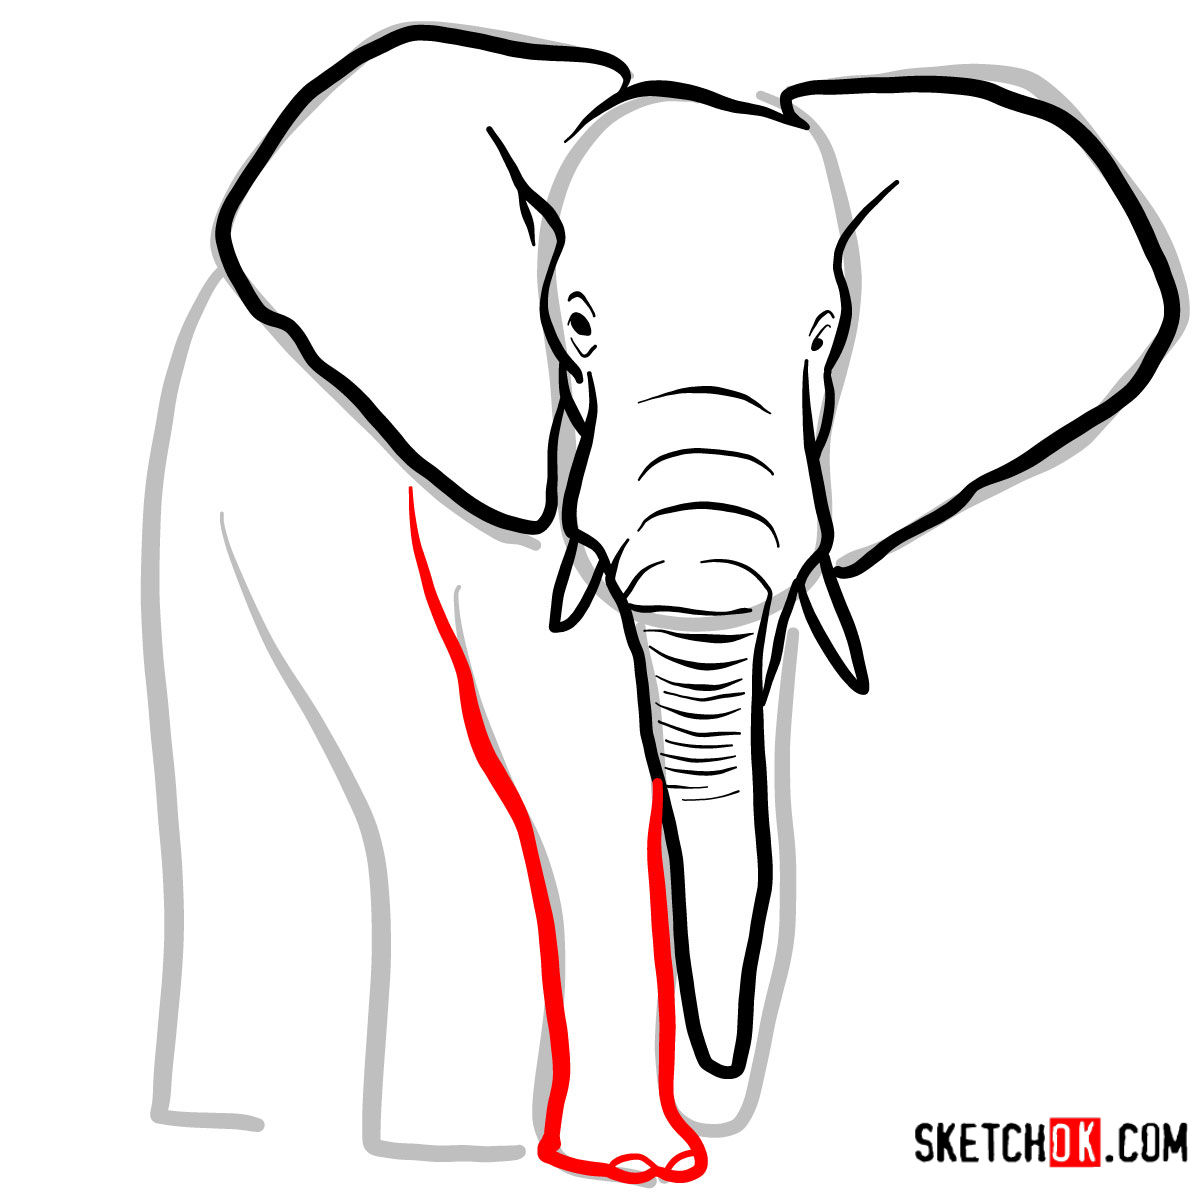 How to draw an Elephant front view | Wild Animals - Sketchok easy drawing  guides